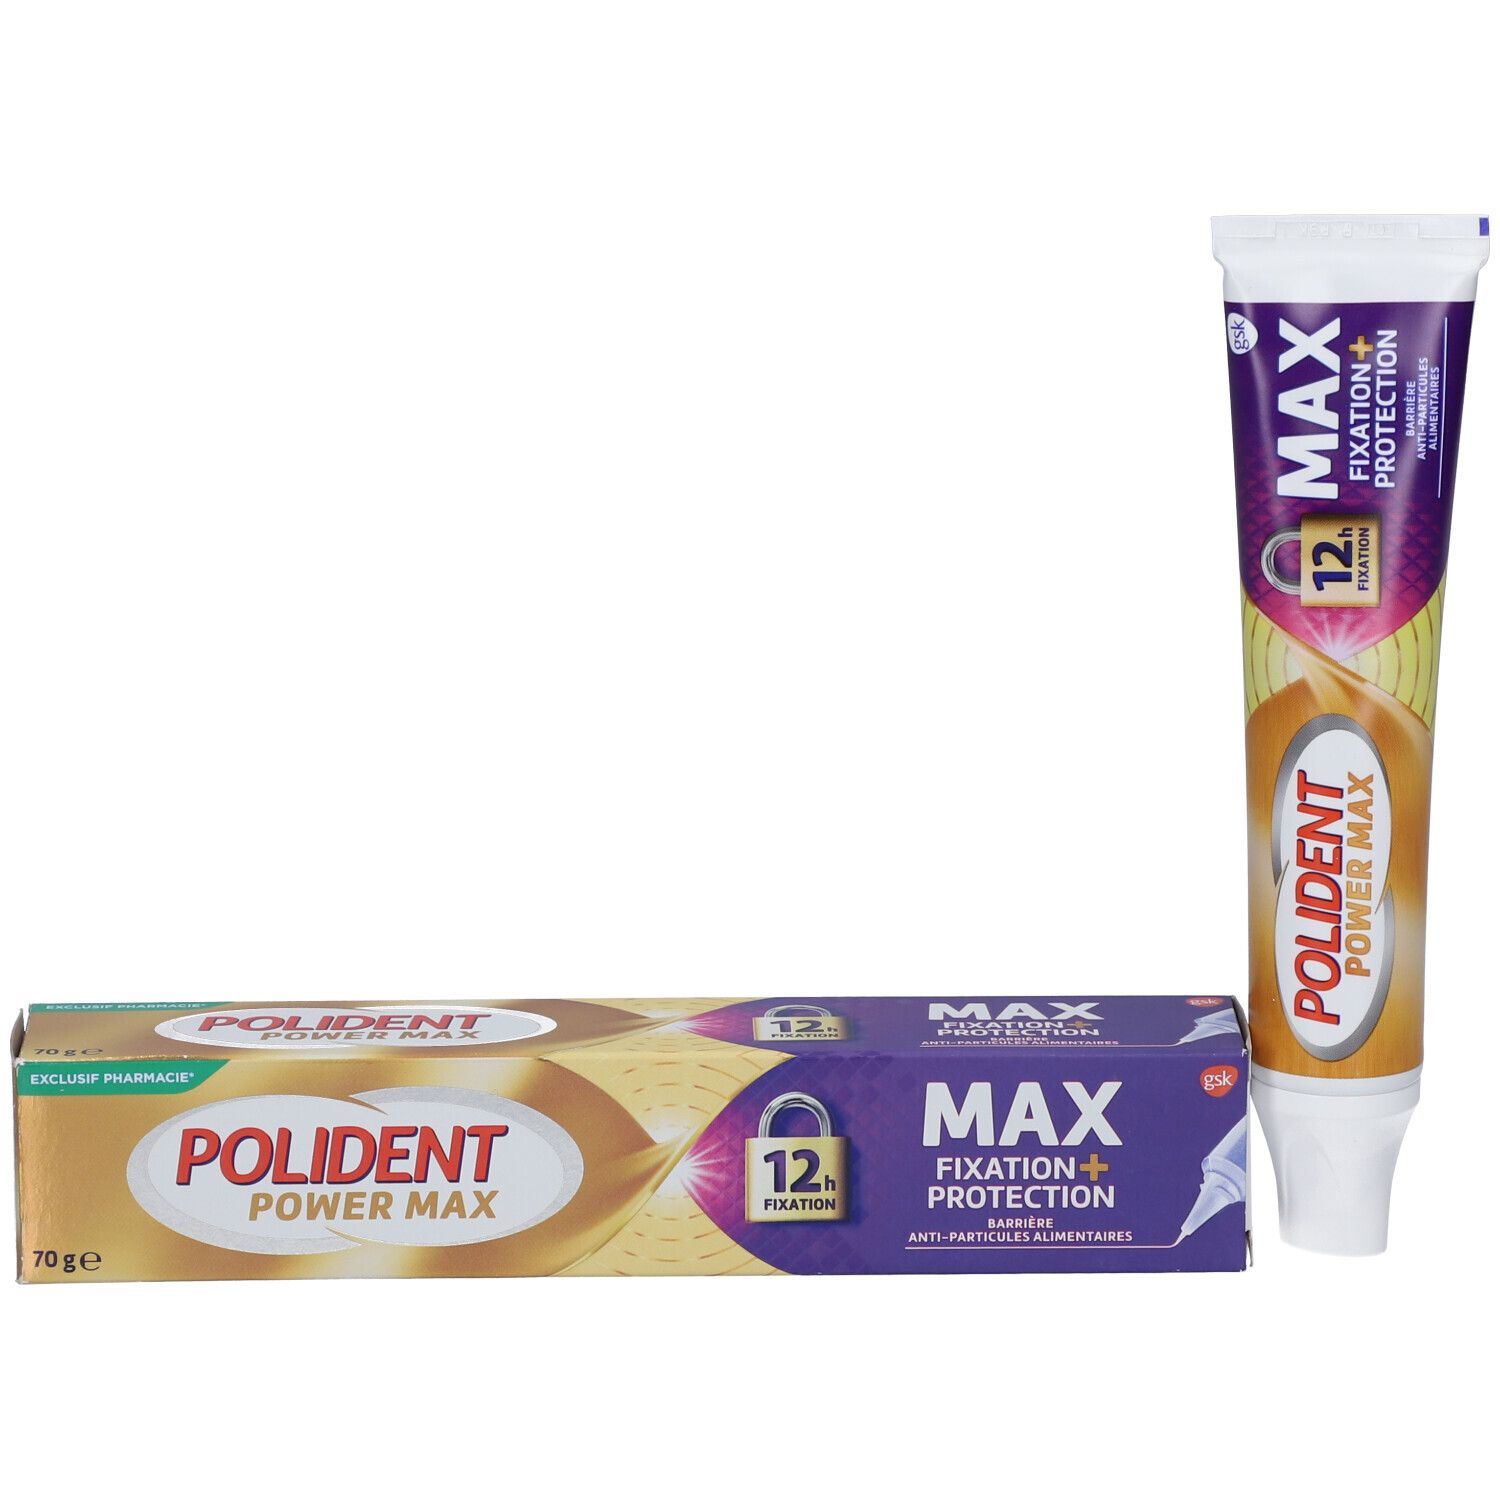 Polident Power MAX Fixation + Protection